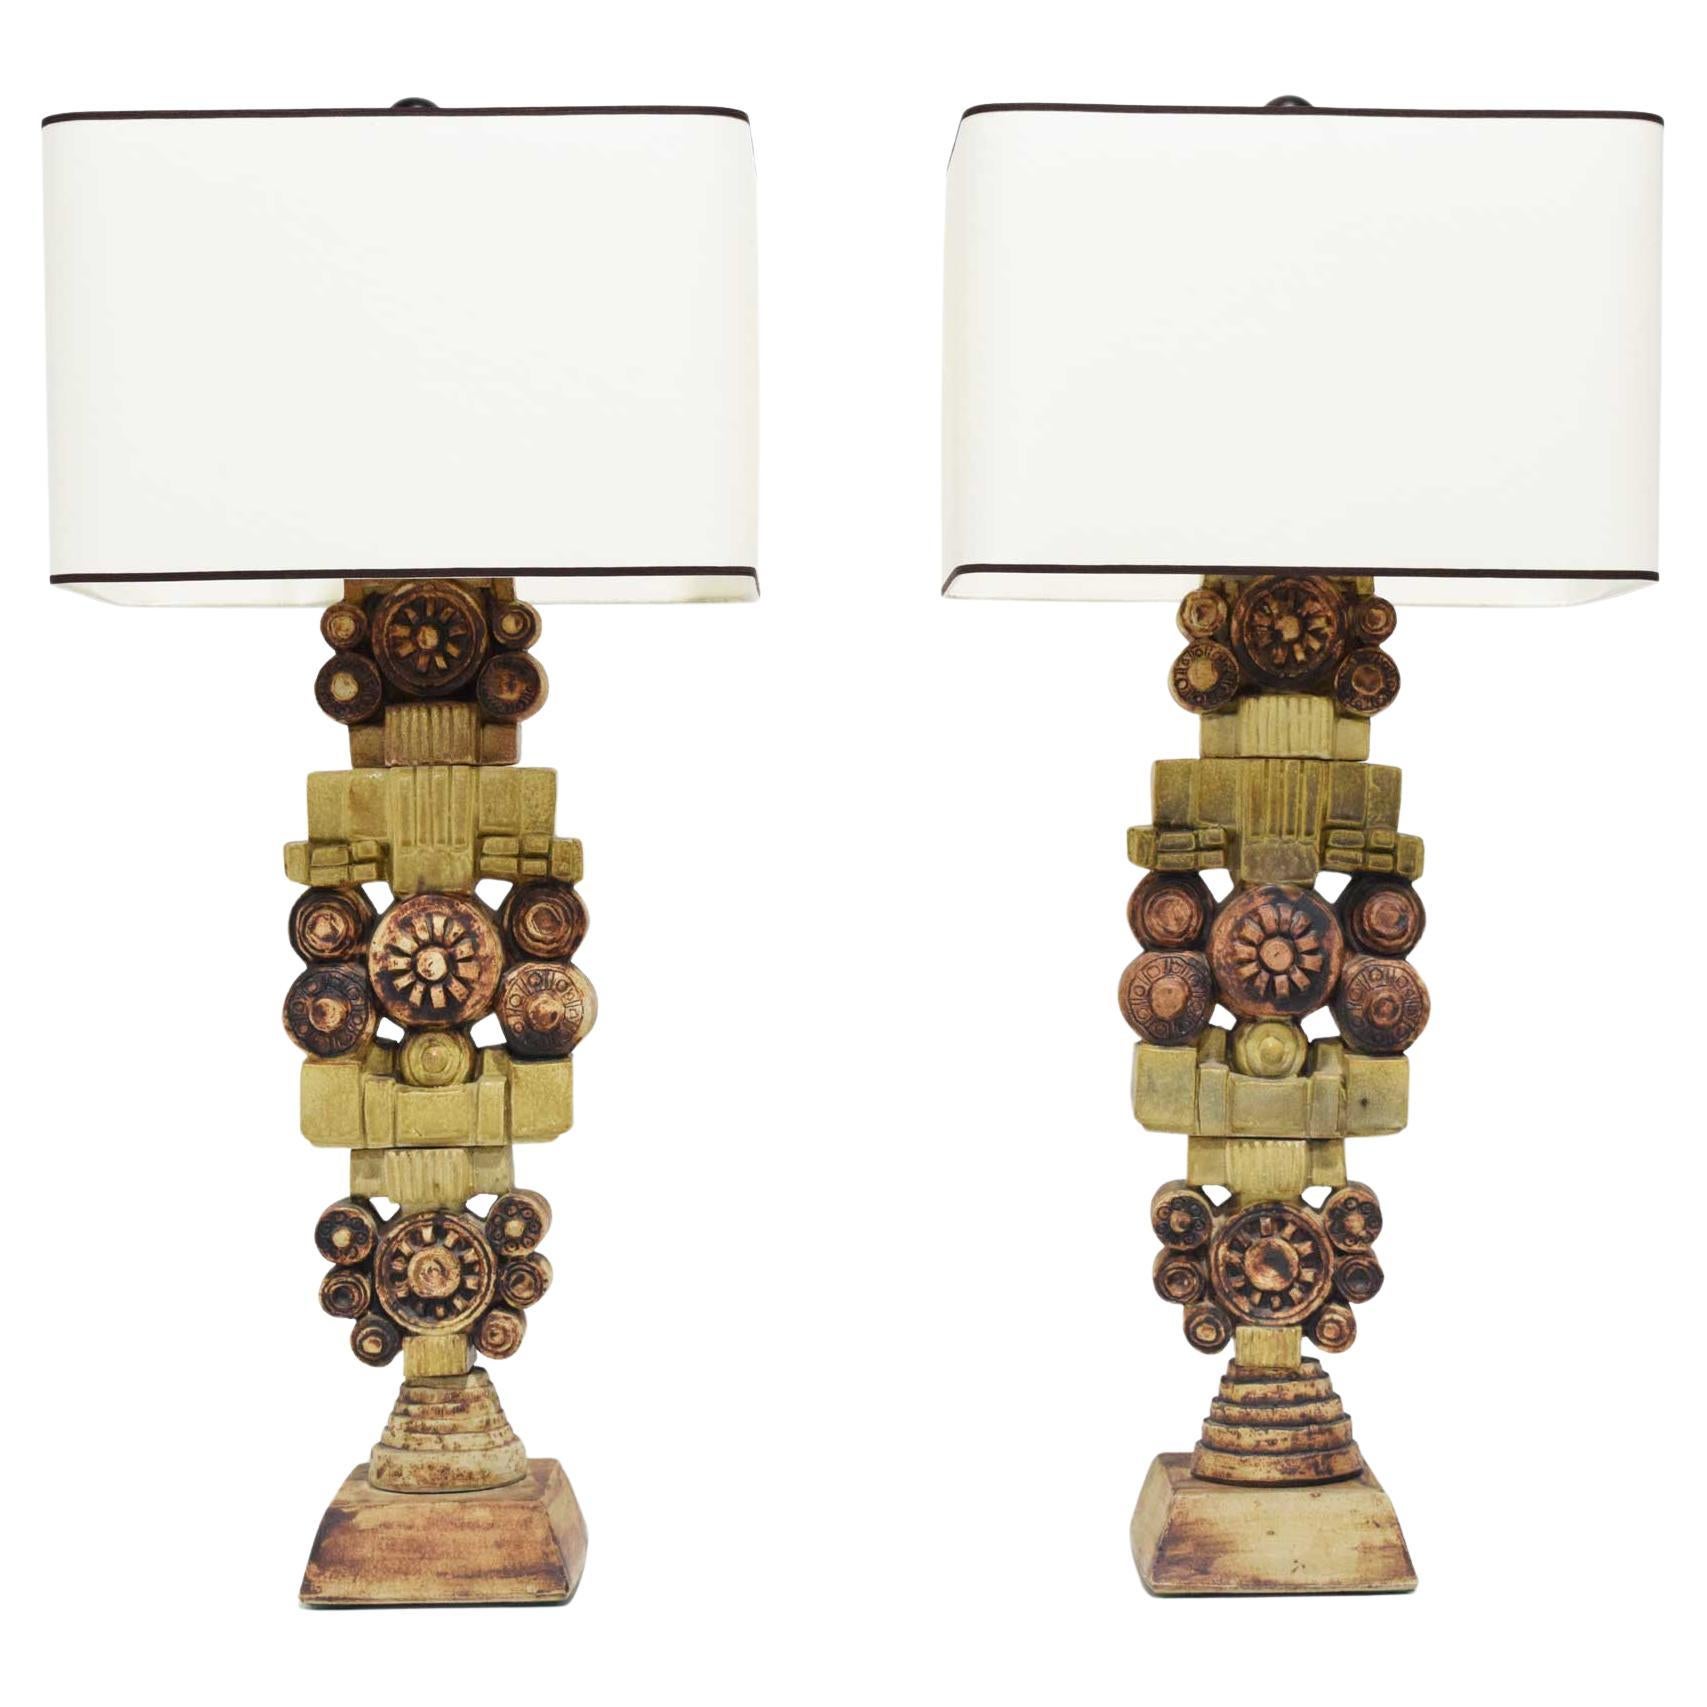 Pair of Large Signed Bernard Rooke Table Lamps, England, 1970s